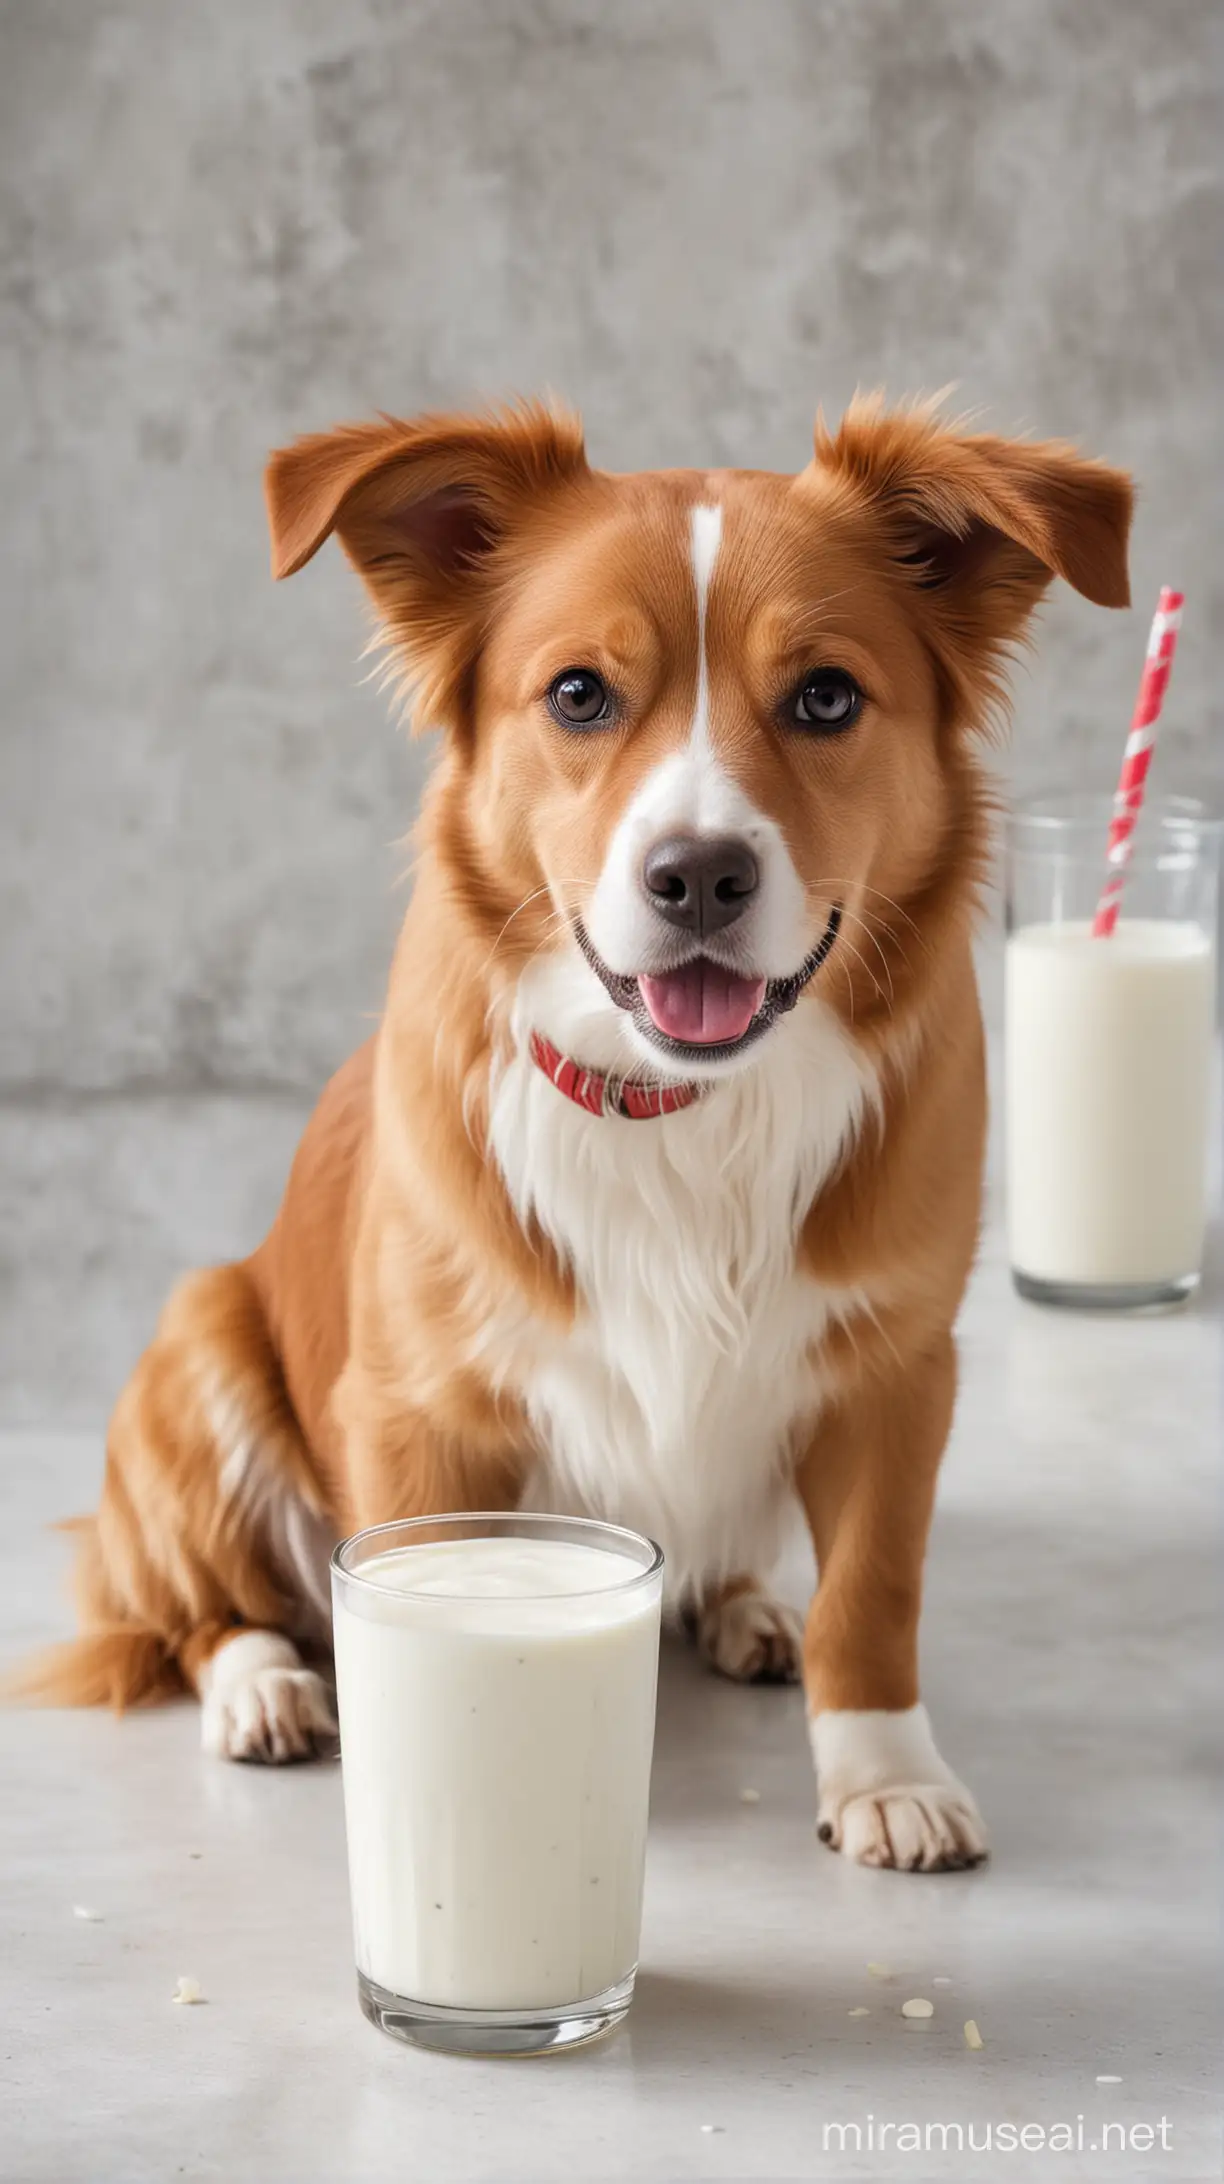 Homemade Probiotics for Dogs Mixing Yogurt and Milk with Cute Canines